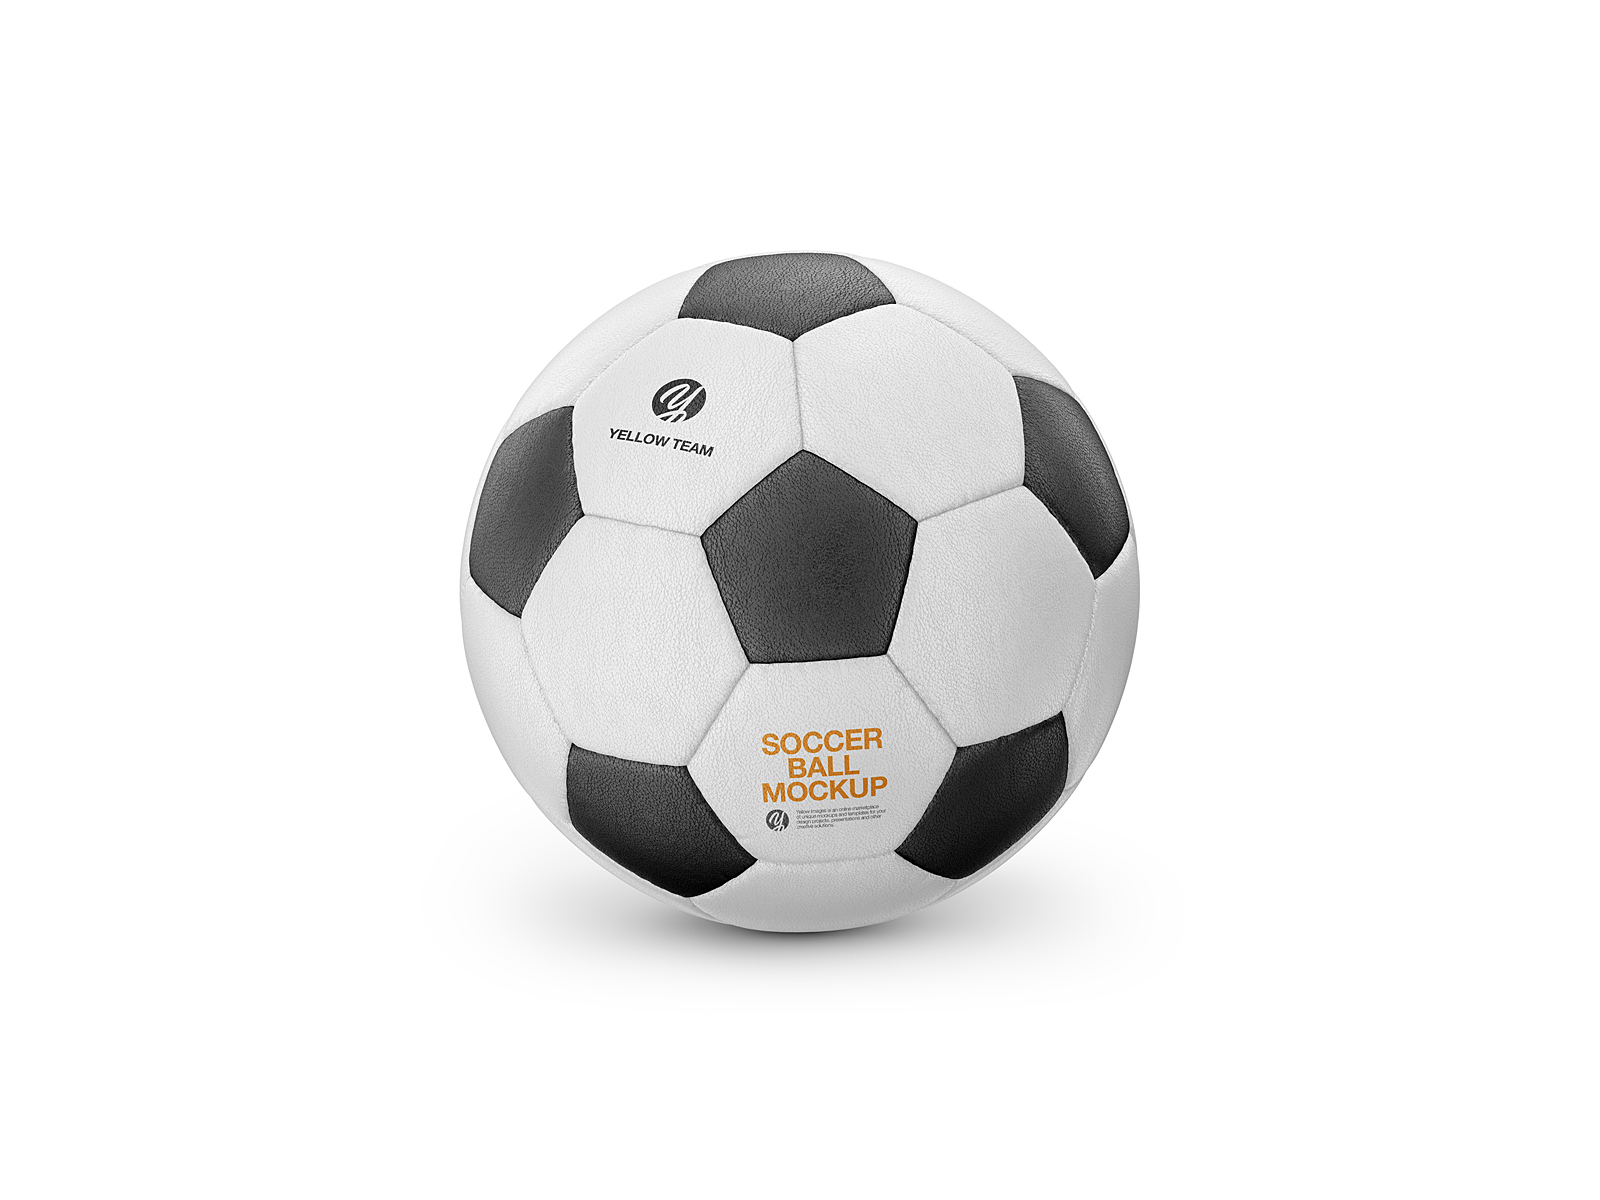 Download Leather Soccer Ball Mockup by CG Tailor on Dribbble